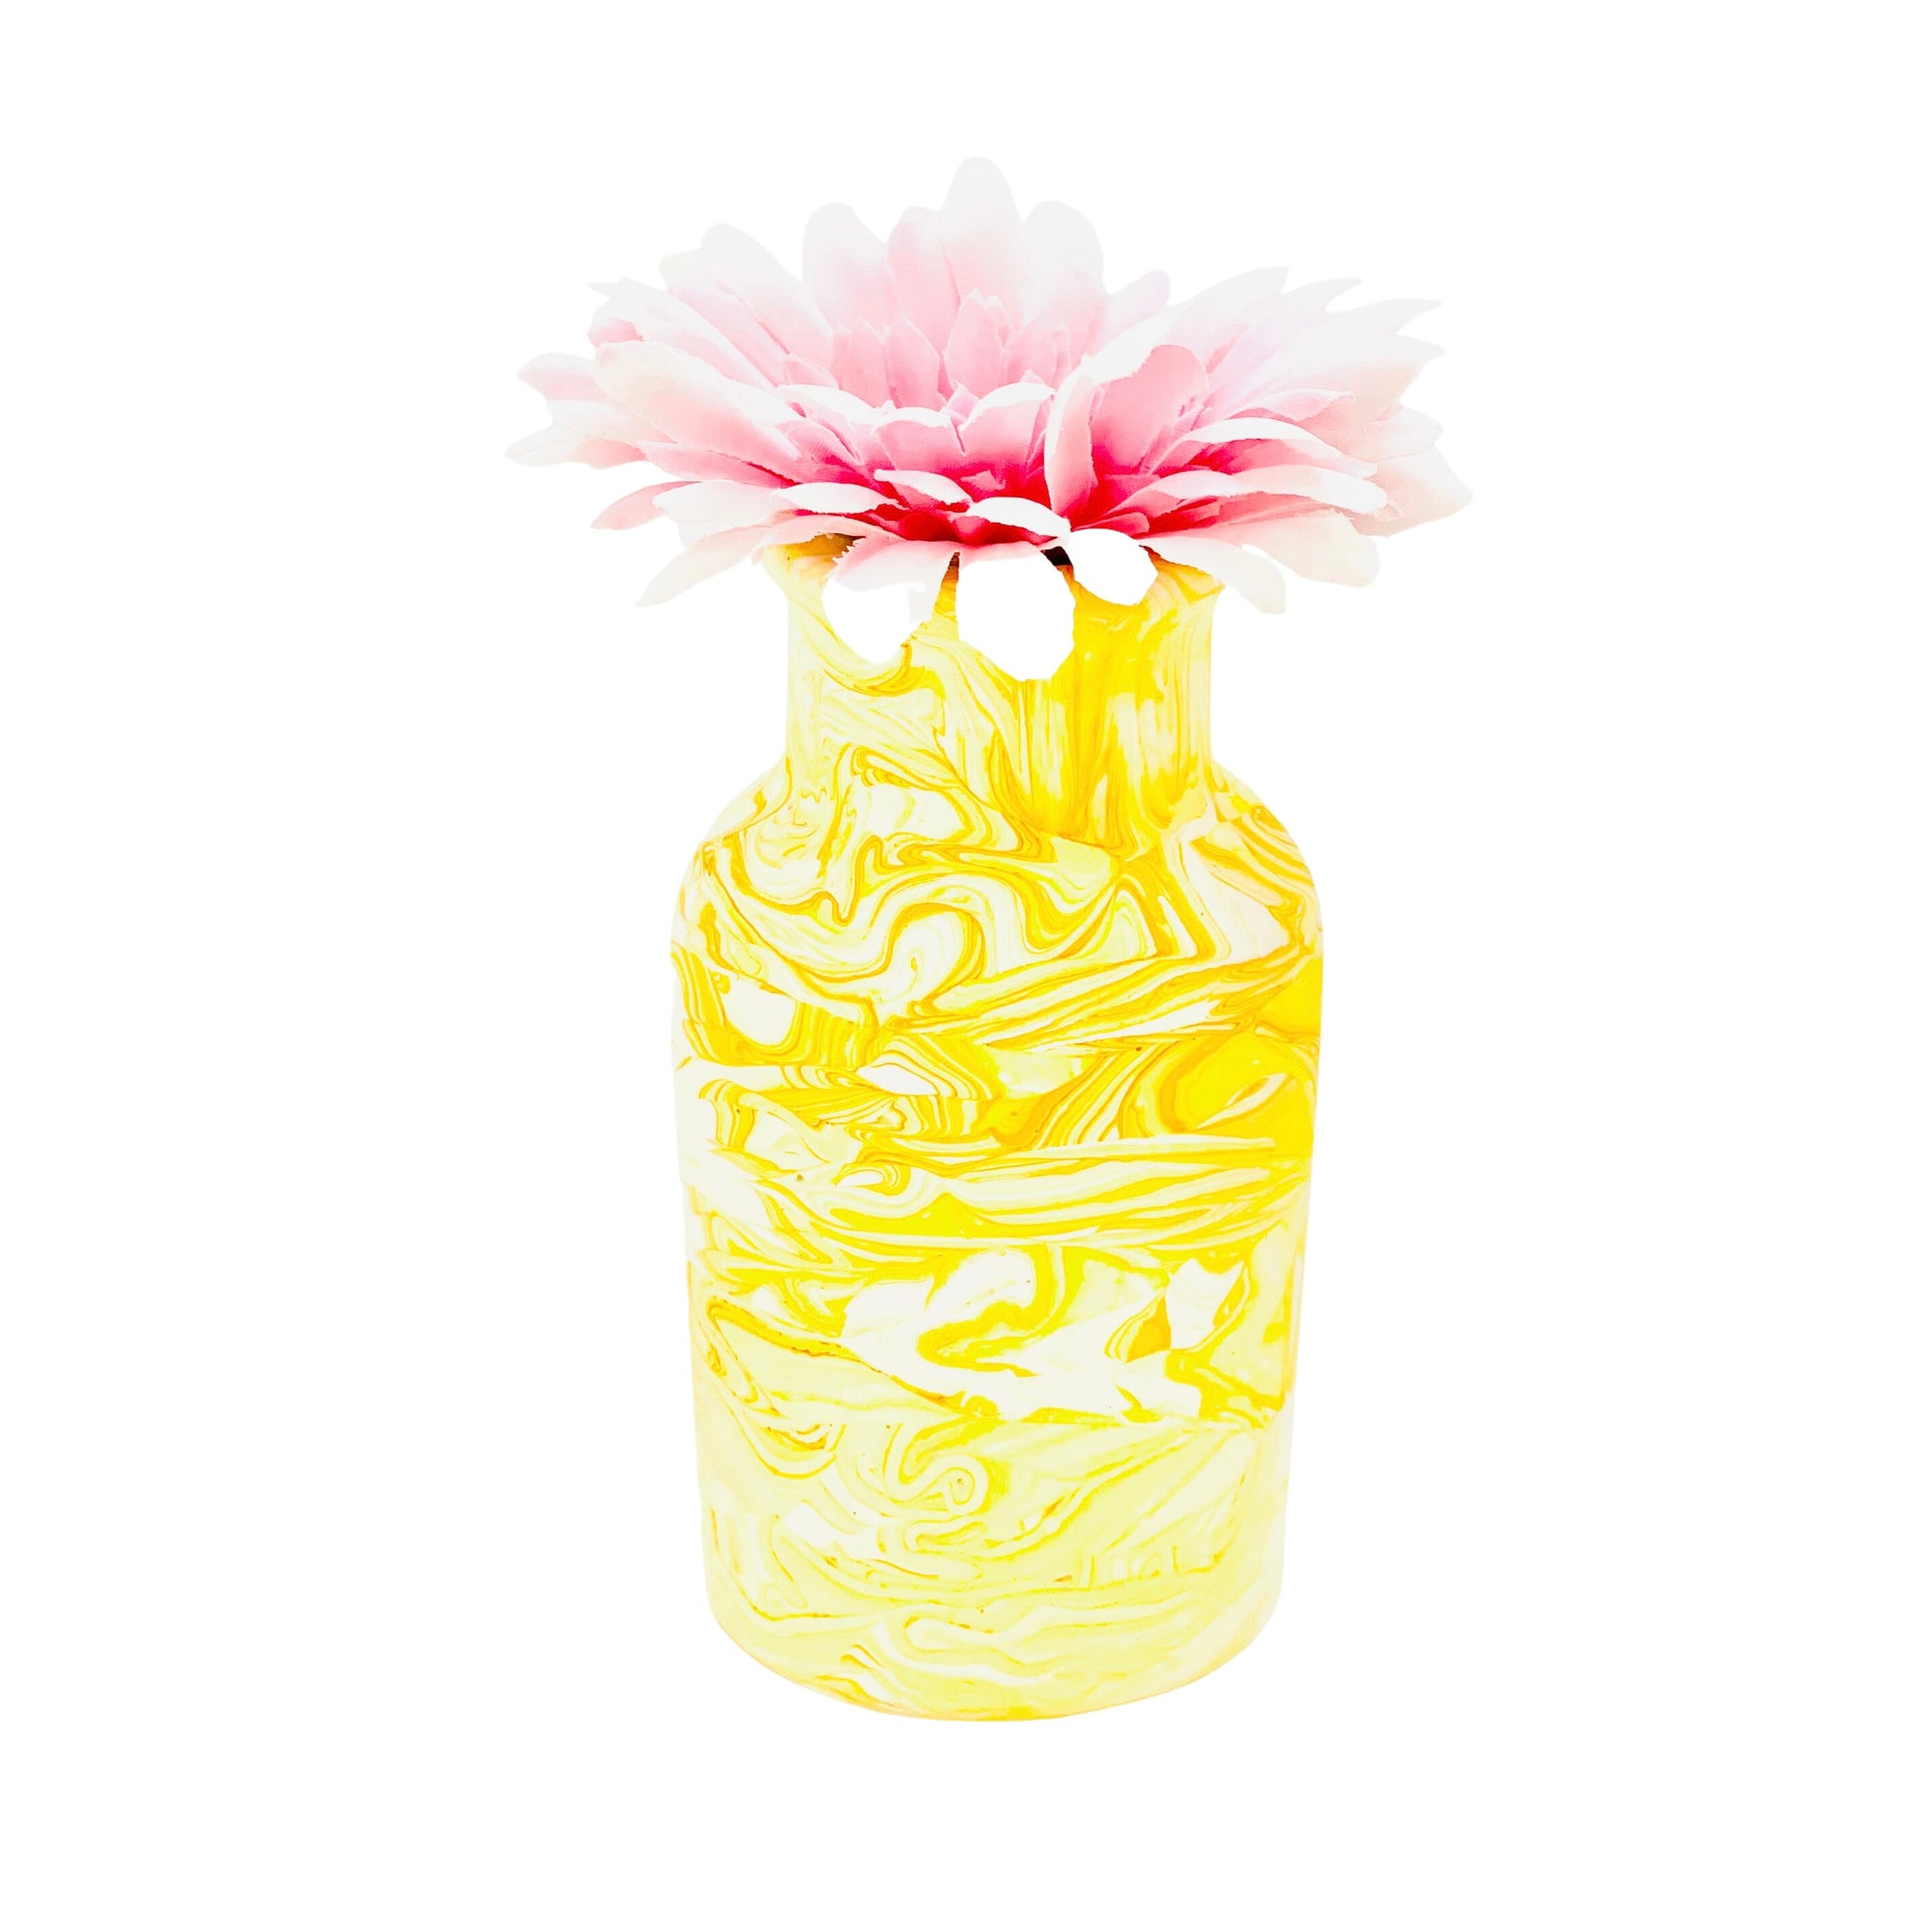 A Jesmonite eco-friendly bottle vase with a neck diameter of 6.50cm marbled with yellow pigment.